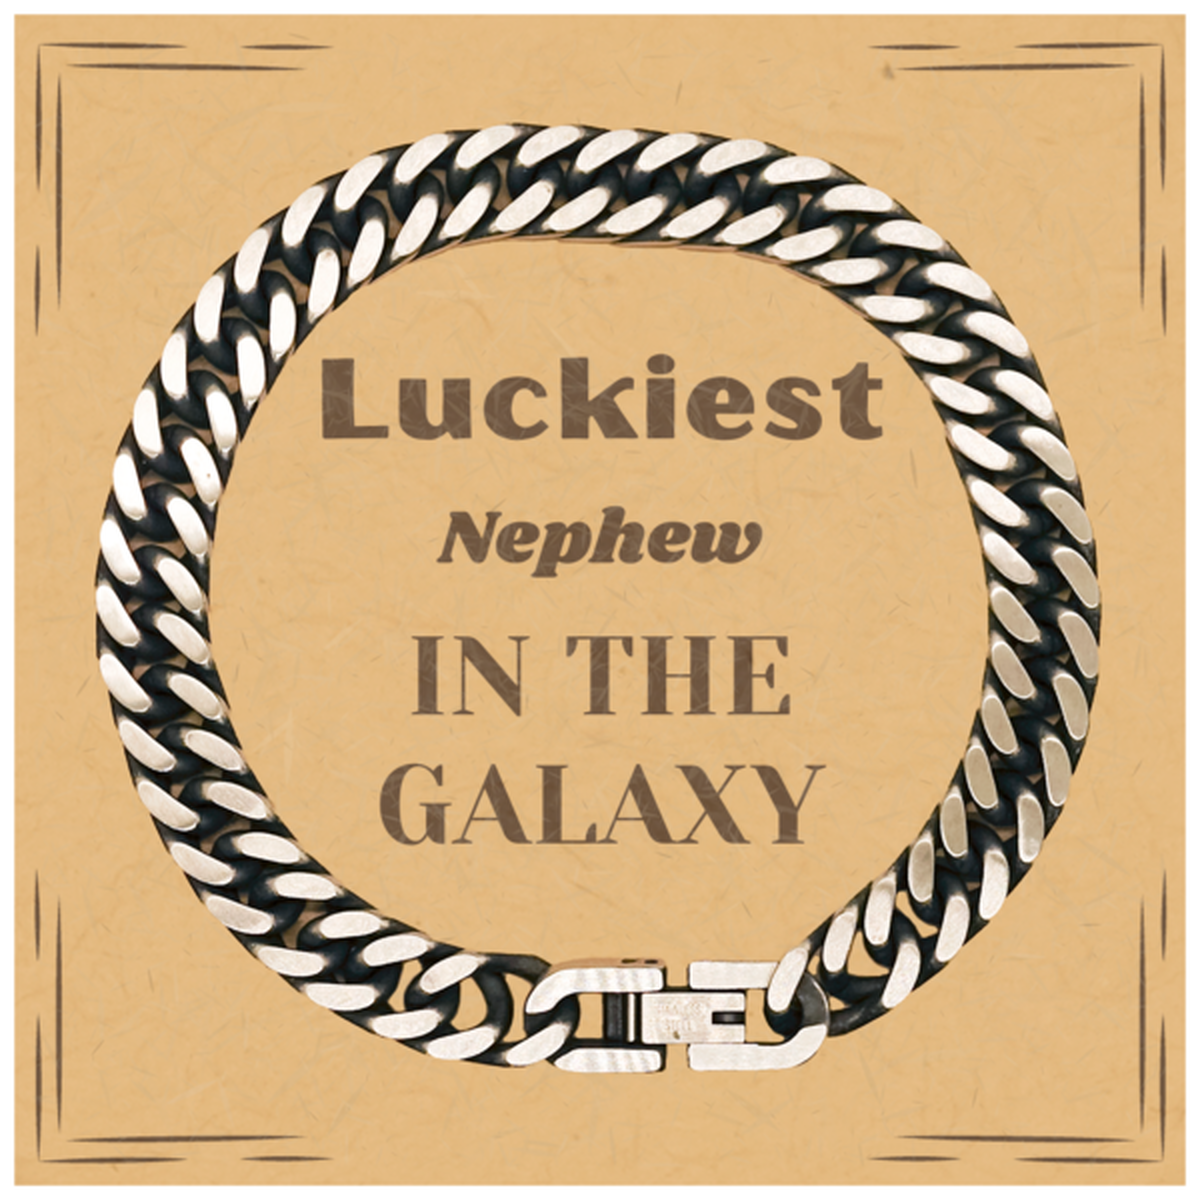 Luckiest Nephew in the Galaxy, To My Nephew Message Card Gifts, Christmas Nephew Cuban Link Chain Bracelet Gifts, X-mas Birthday Unique Gifts For Nephew Men Women